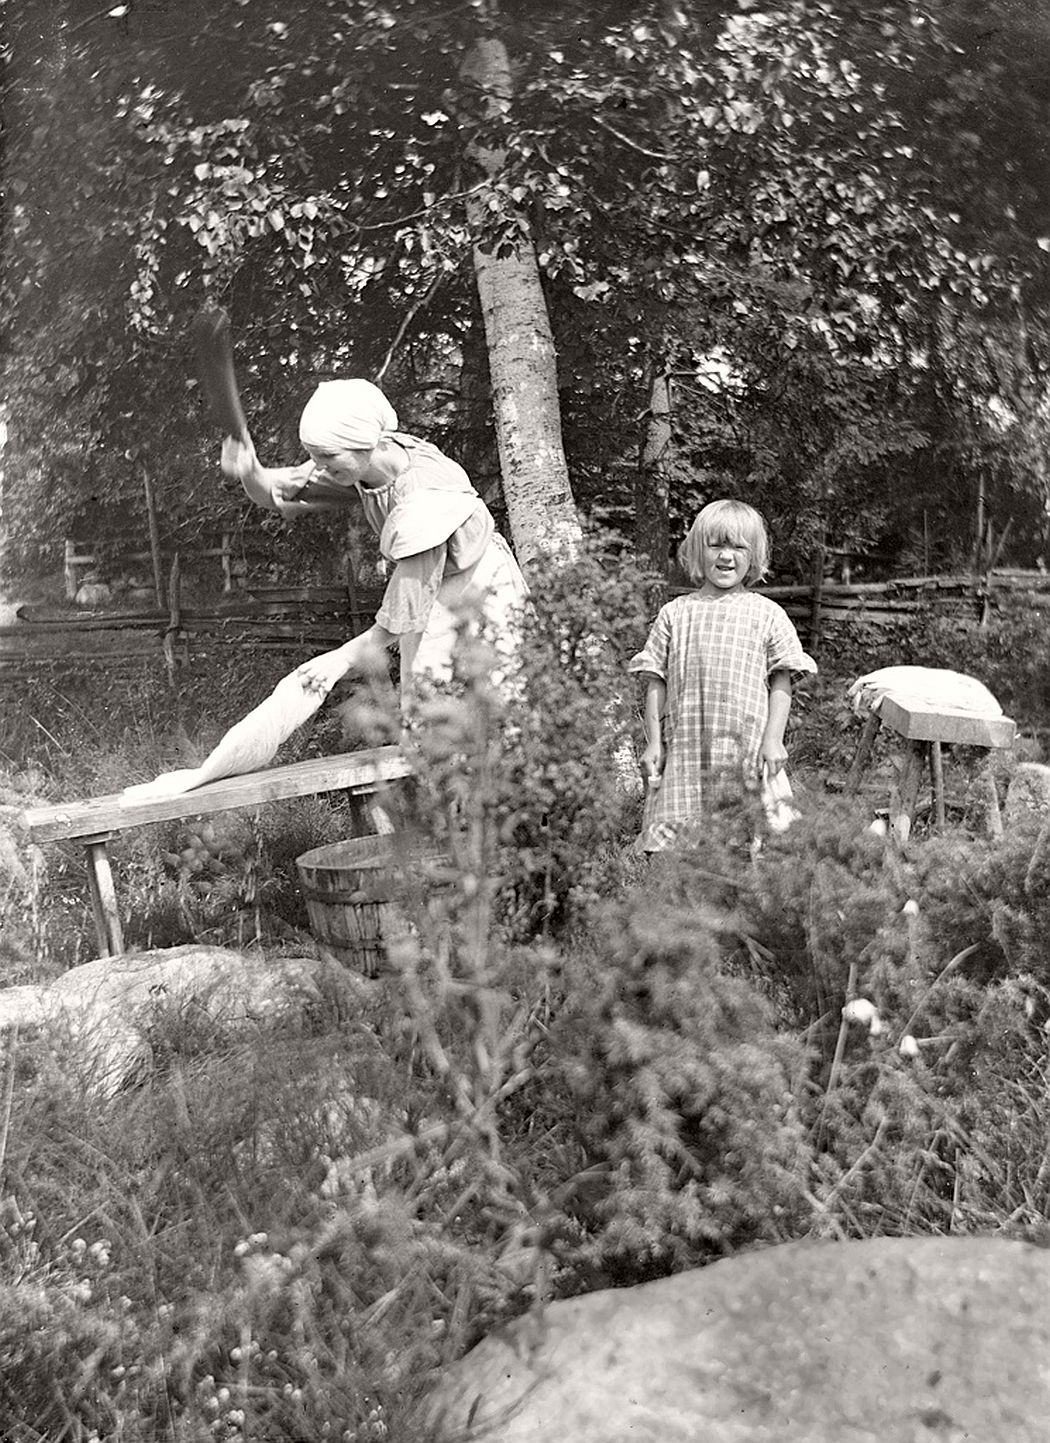 Photo from around 1925. Ebba Gustafsson (b. 1903) pats laundry and youngest sister Elin (b. 1918) stands next to it.